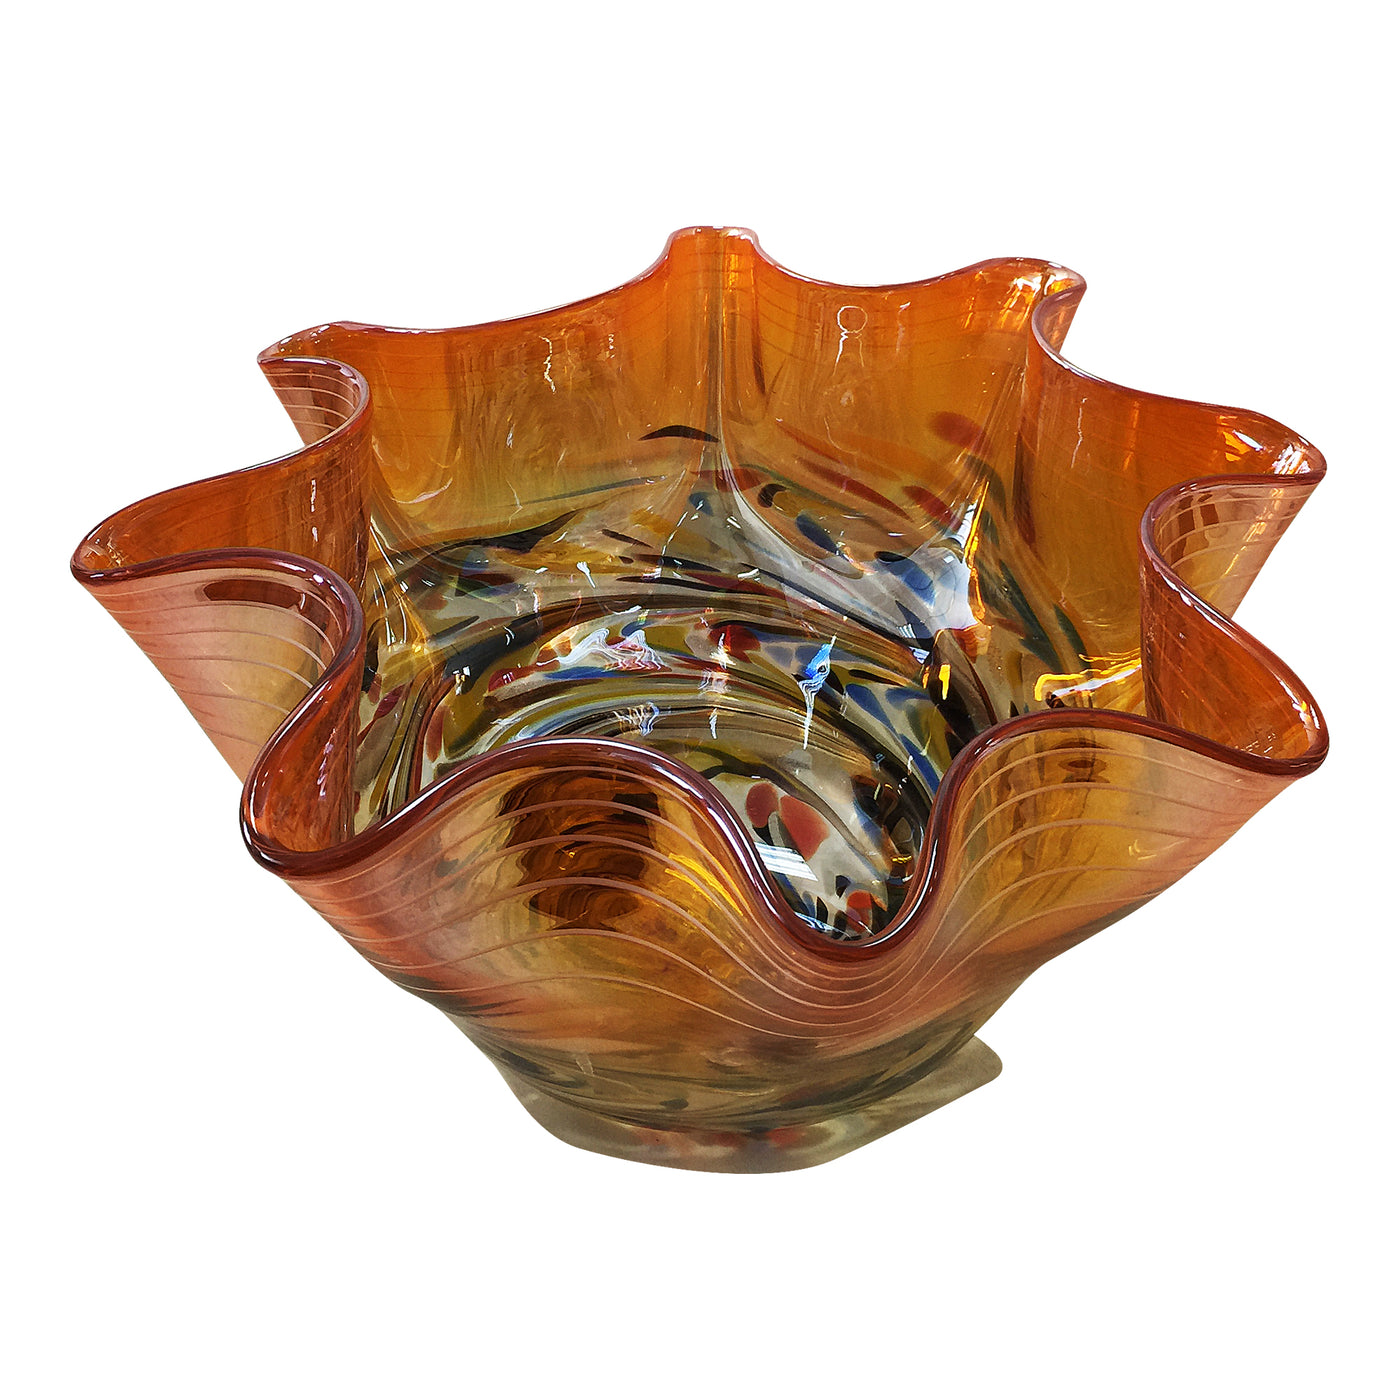 Add a retro touch with this vibrant, orange bowl. The stylish freeform design will look great as part of a display, or sim...